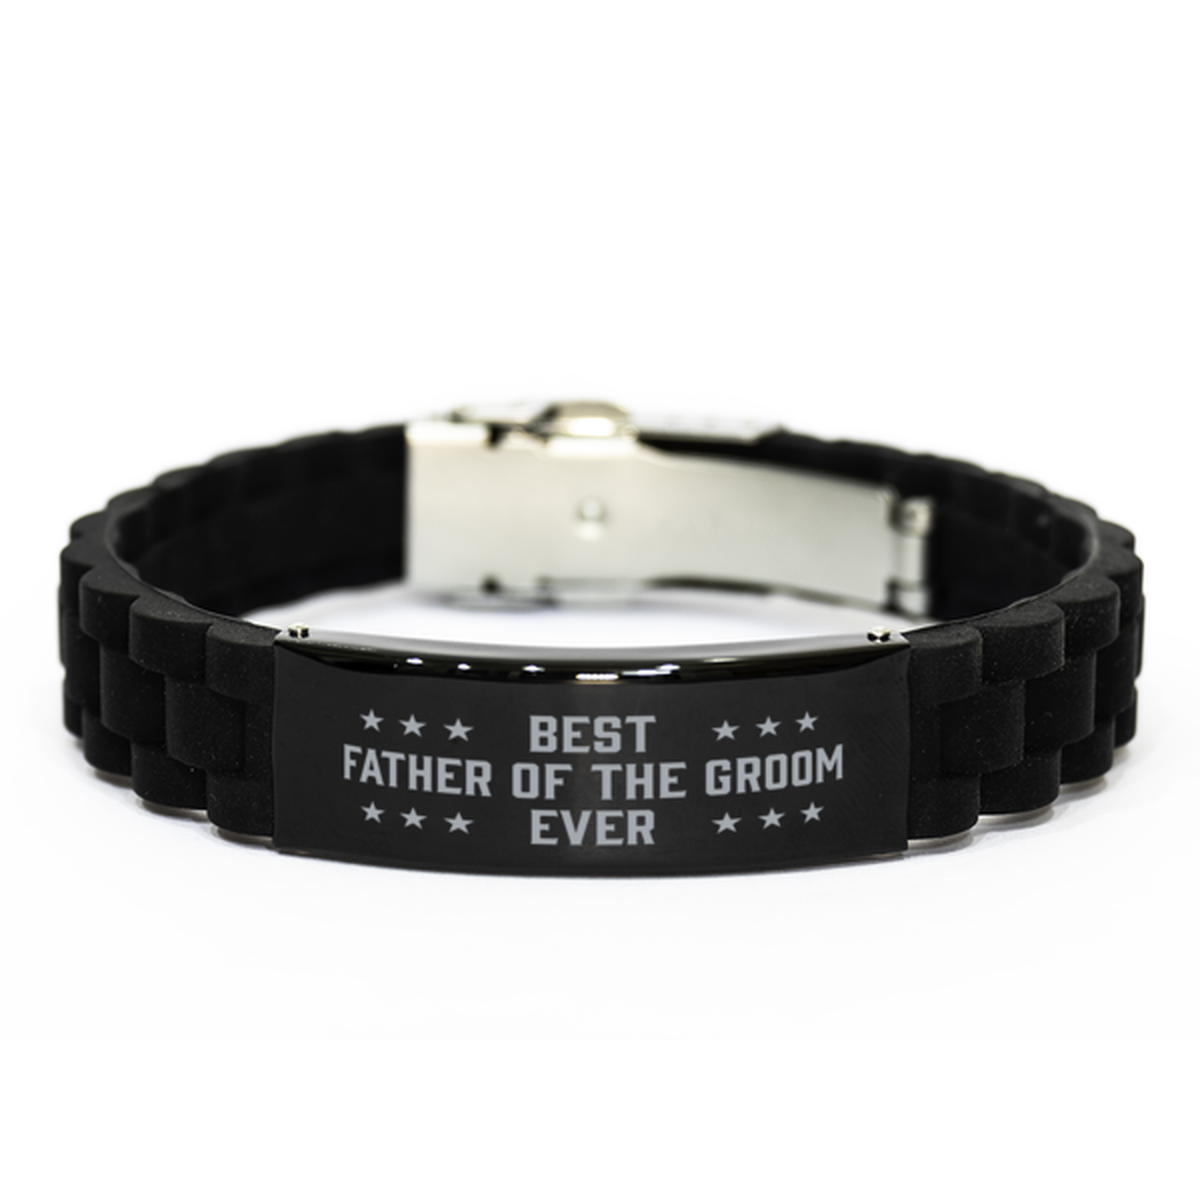 Best Father of the groom Ever Father of the groom Gifts, Funny Black Engraved Bracelet For Father of the groom, Family Gifts For Men